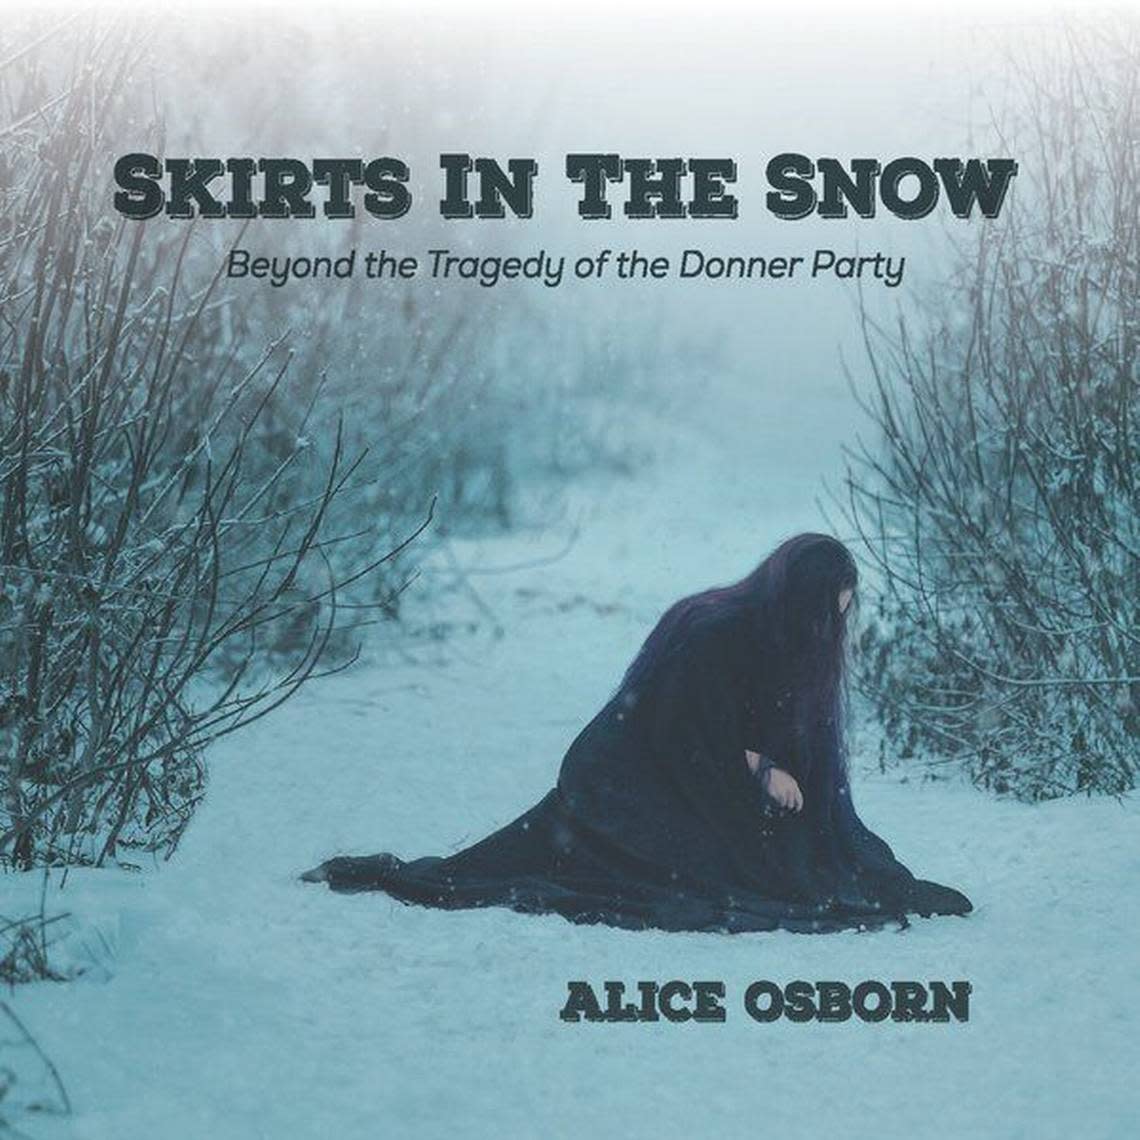 “Skirts in the Snow,” a CD of songs by Alice Osborn